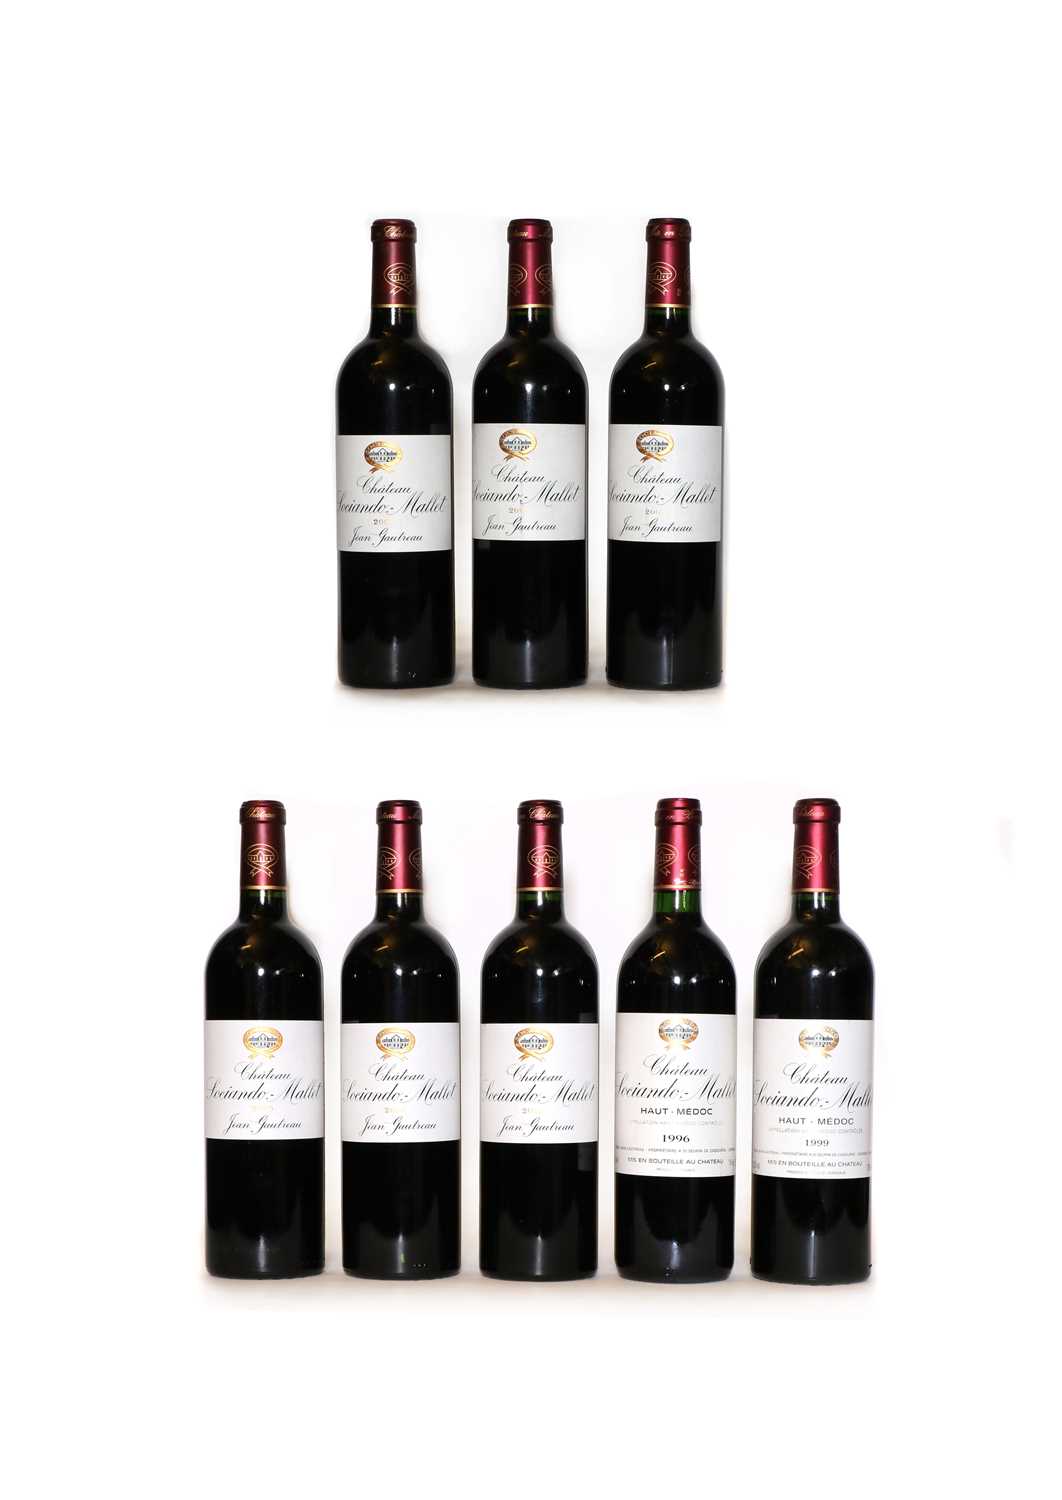 Lot 150 - Chateau Sociando Mallet, Haut Medoc, 1996, 1999, 2003, 2005 and 2009, (8 in total)